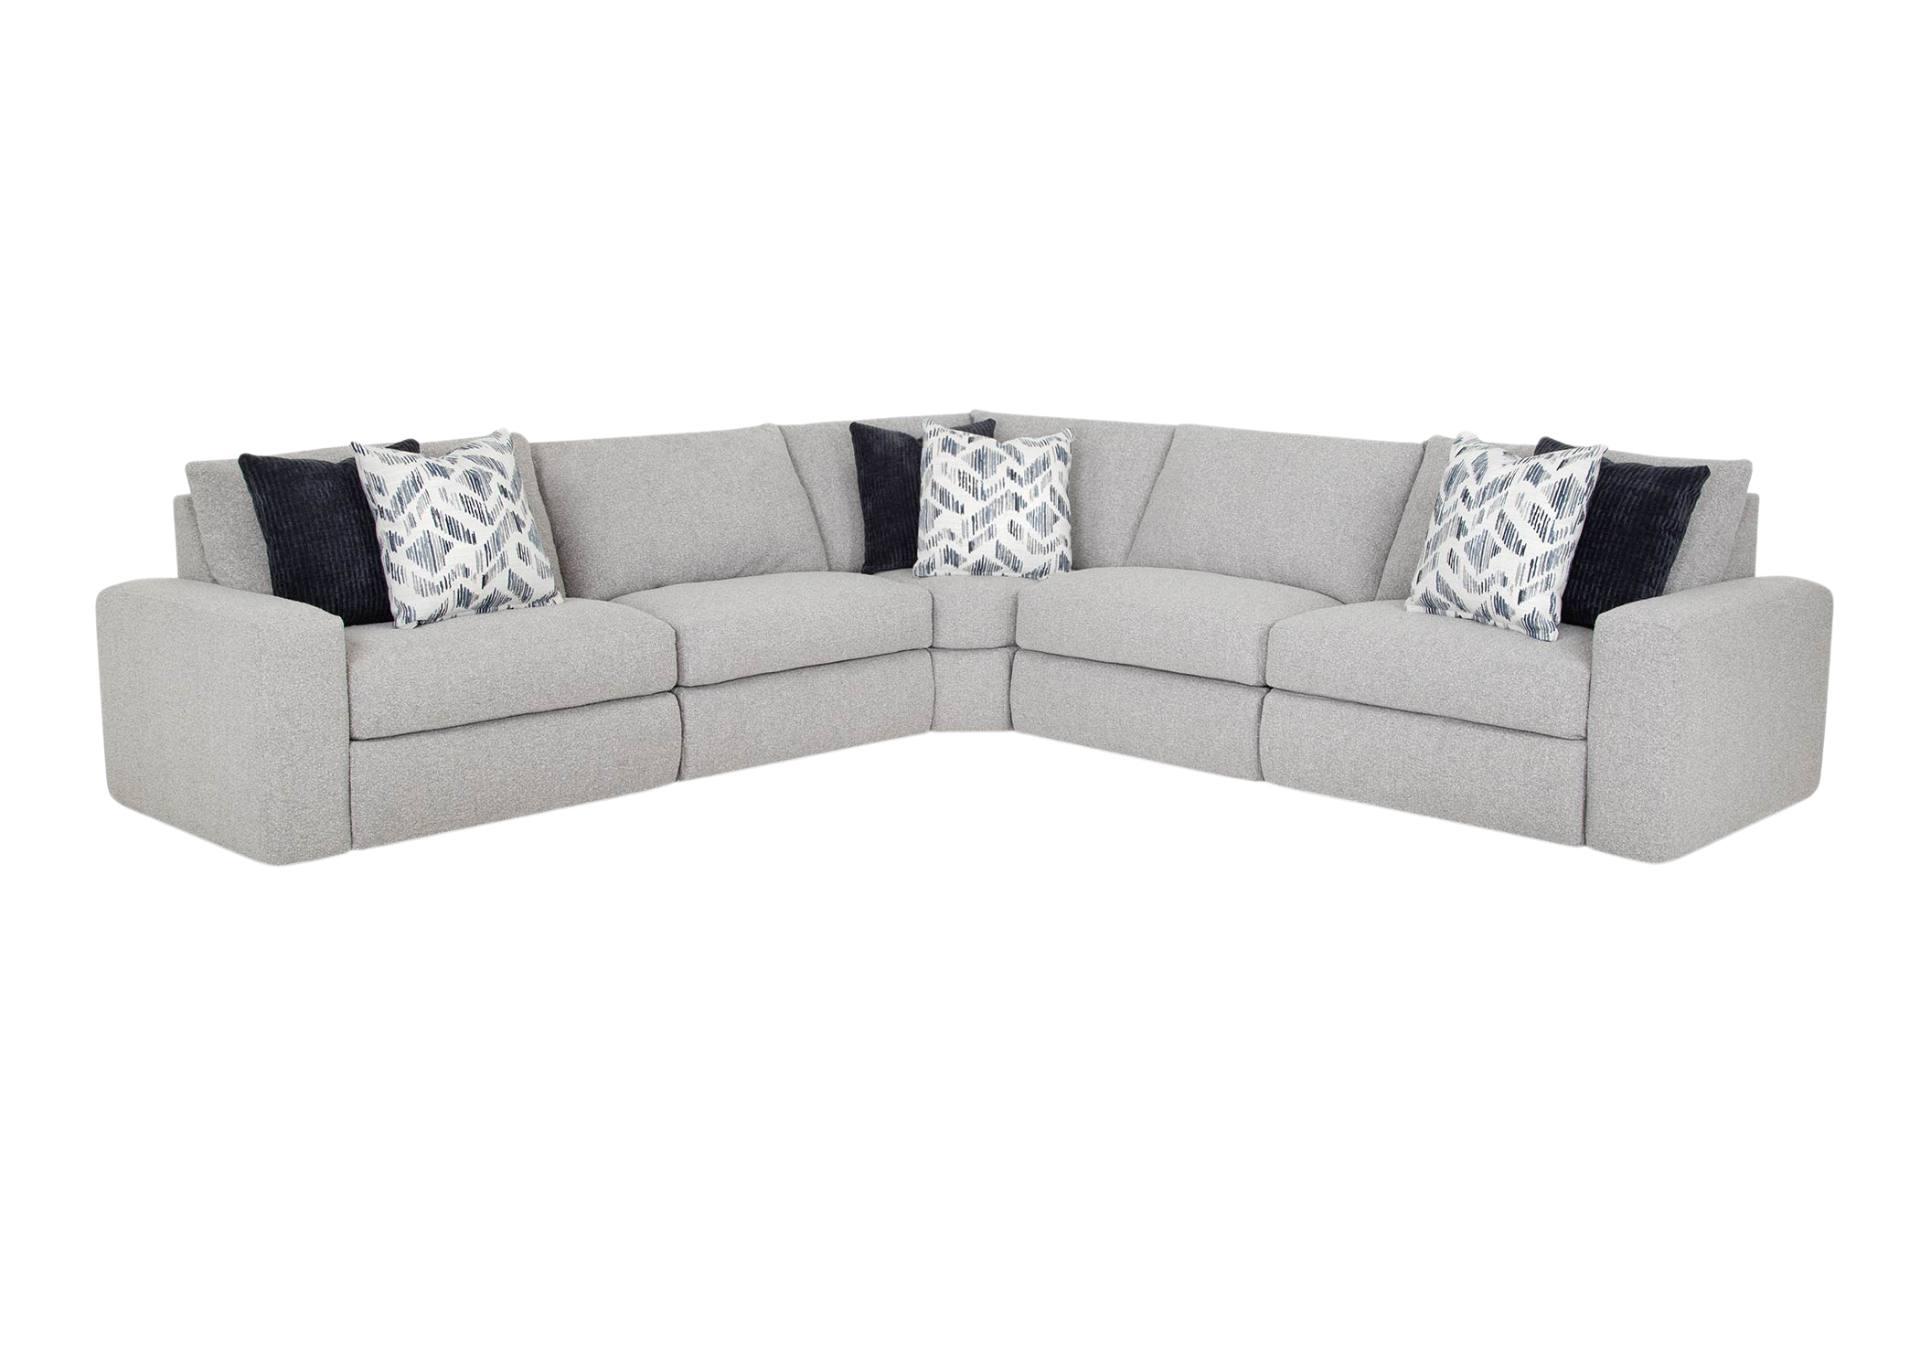 TORONTO 5PC. PWR SECTIONAL,FRANKLIN